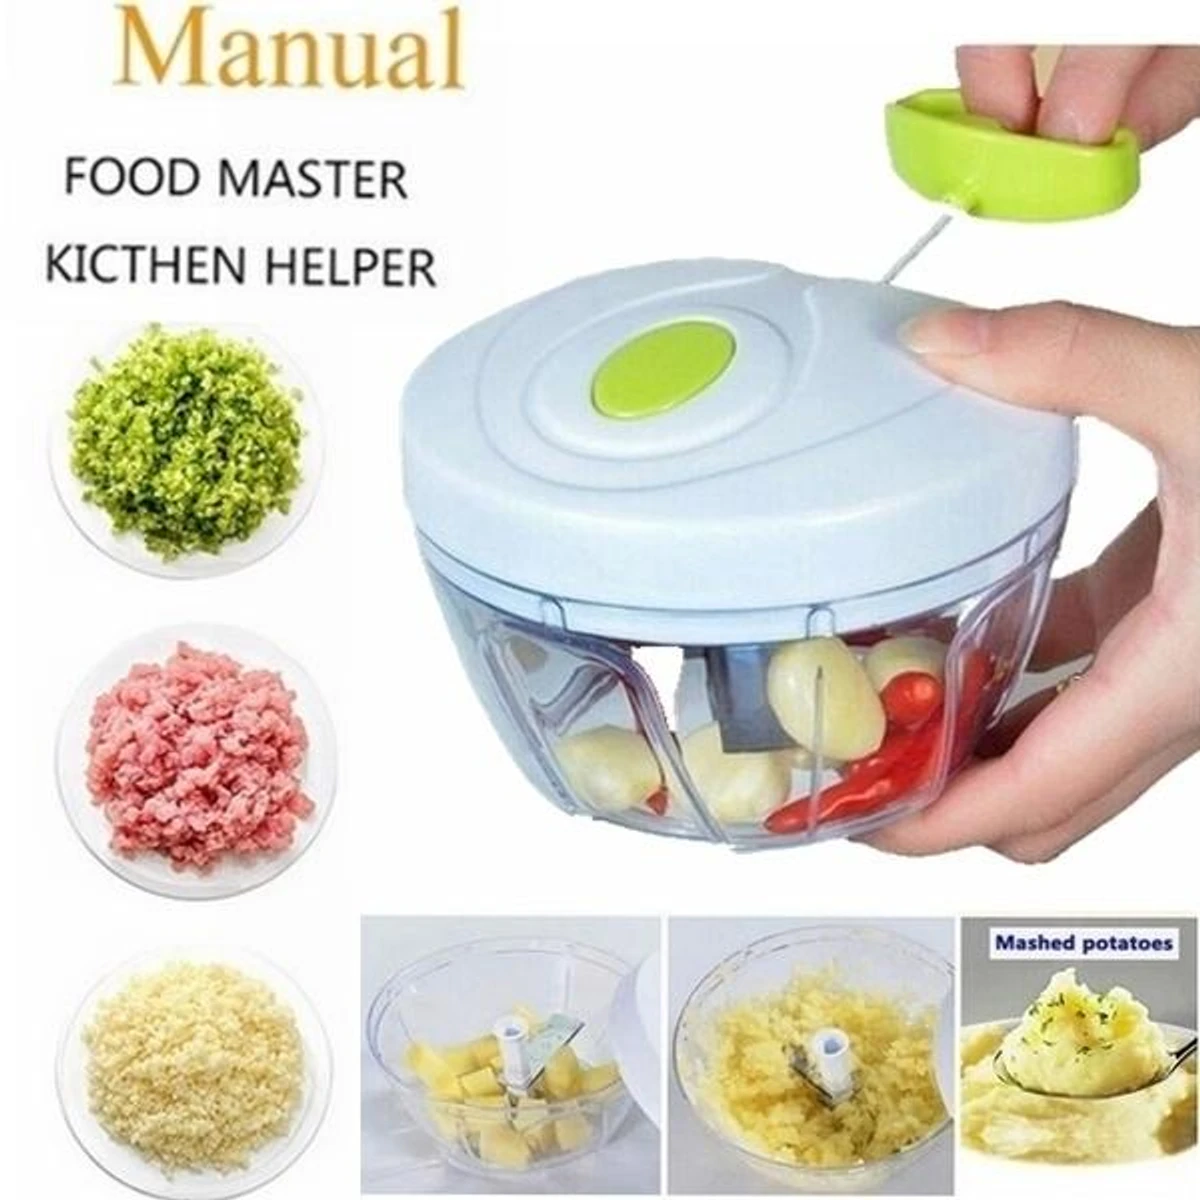 Manual Handy Chopper for Vegetable and Fruits